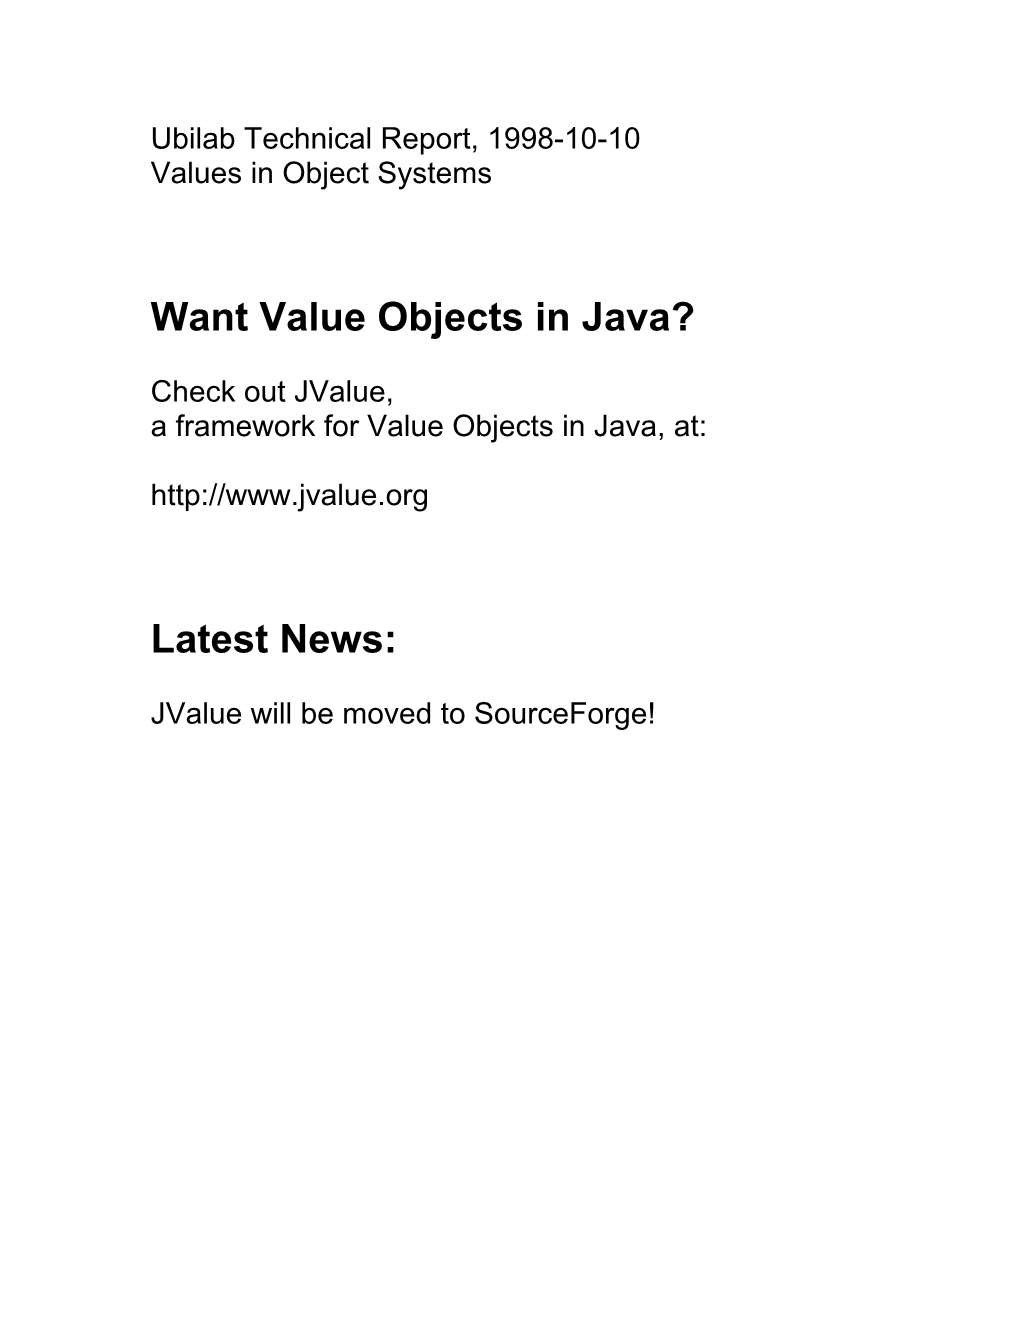 Want Value Objects in Java?